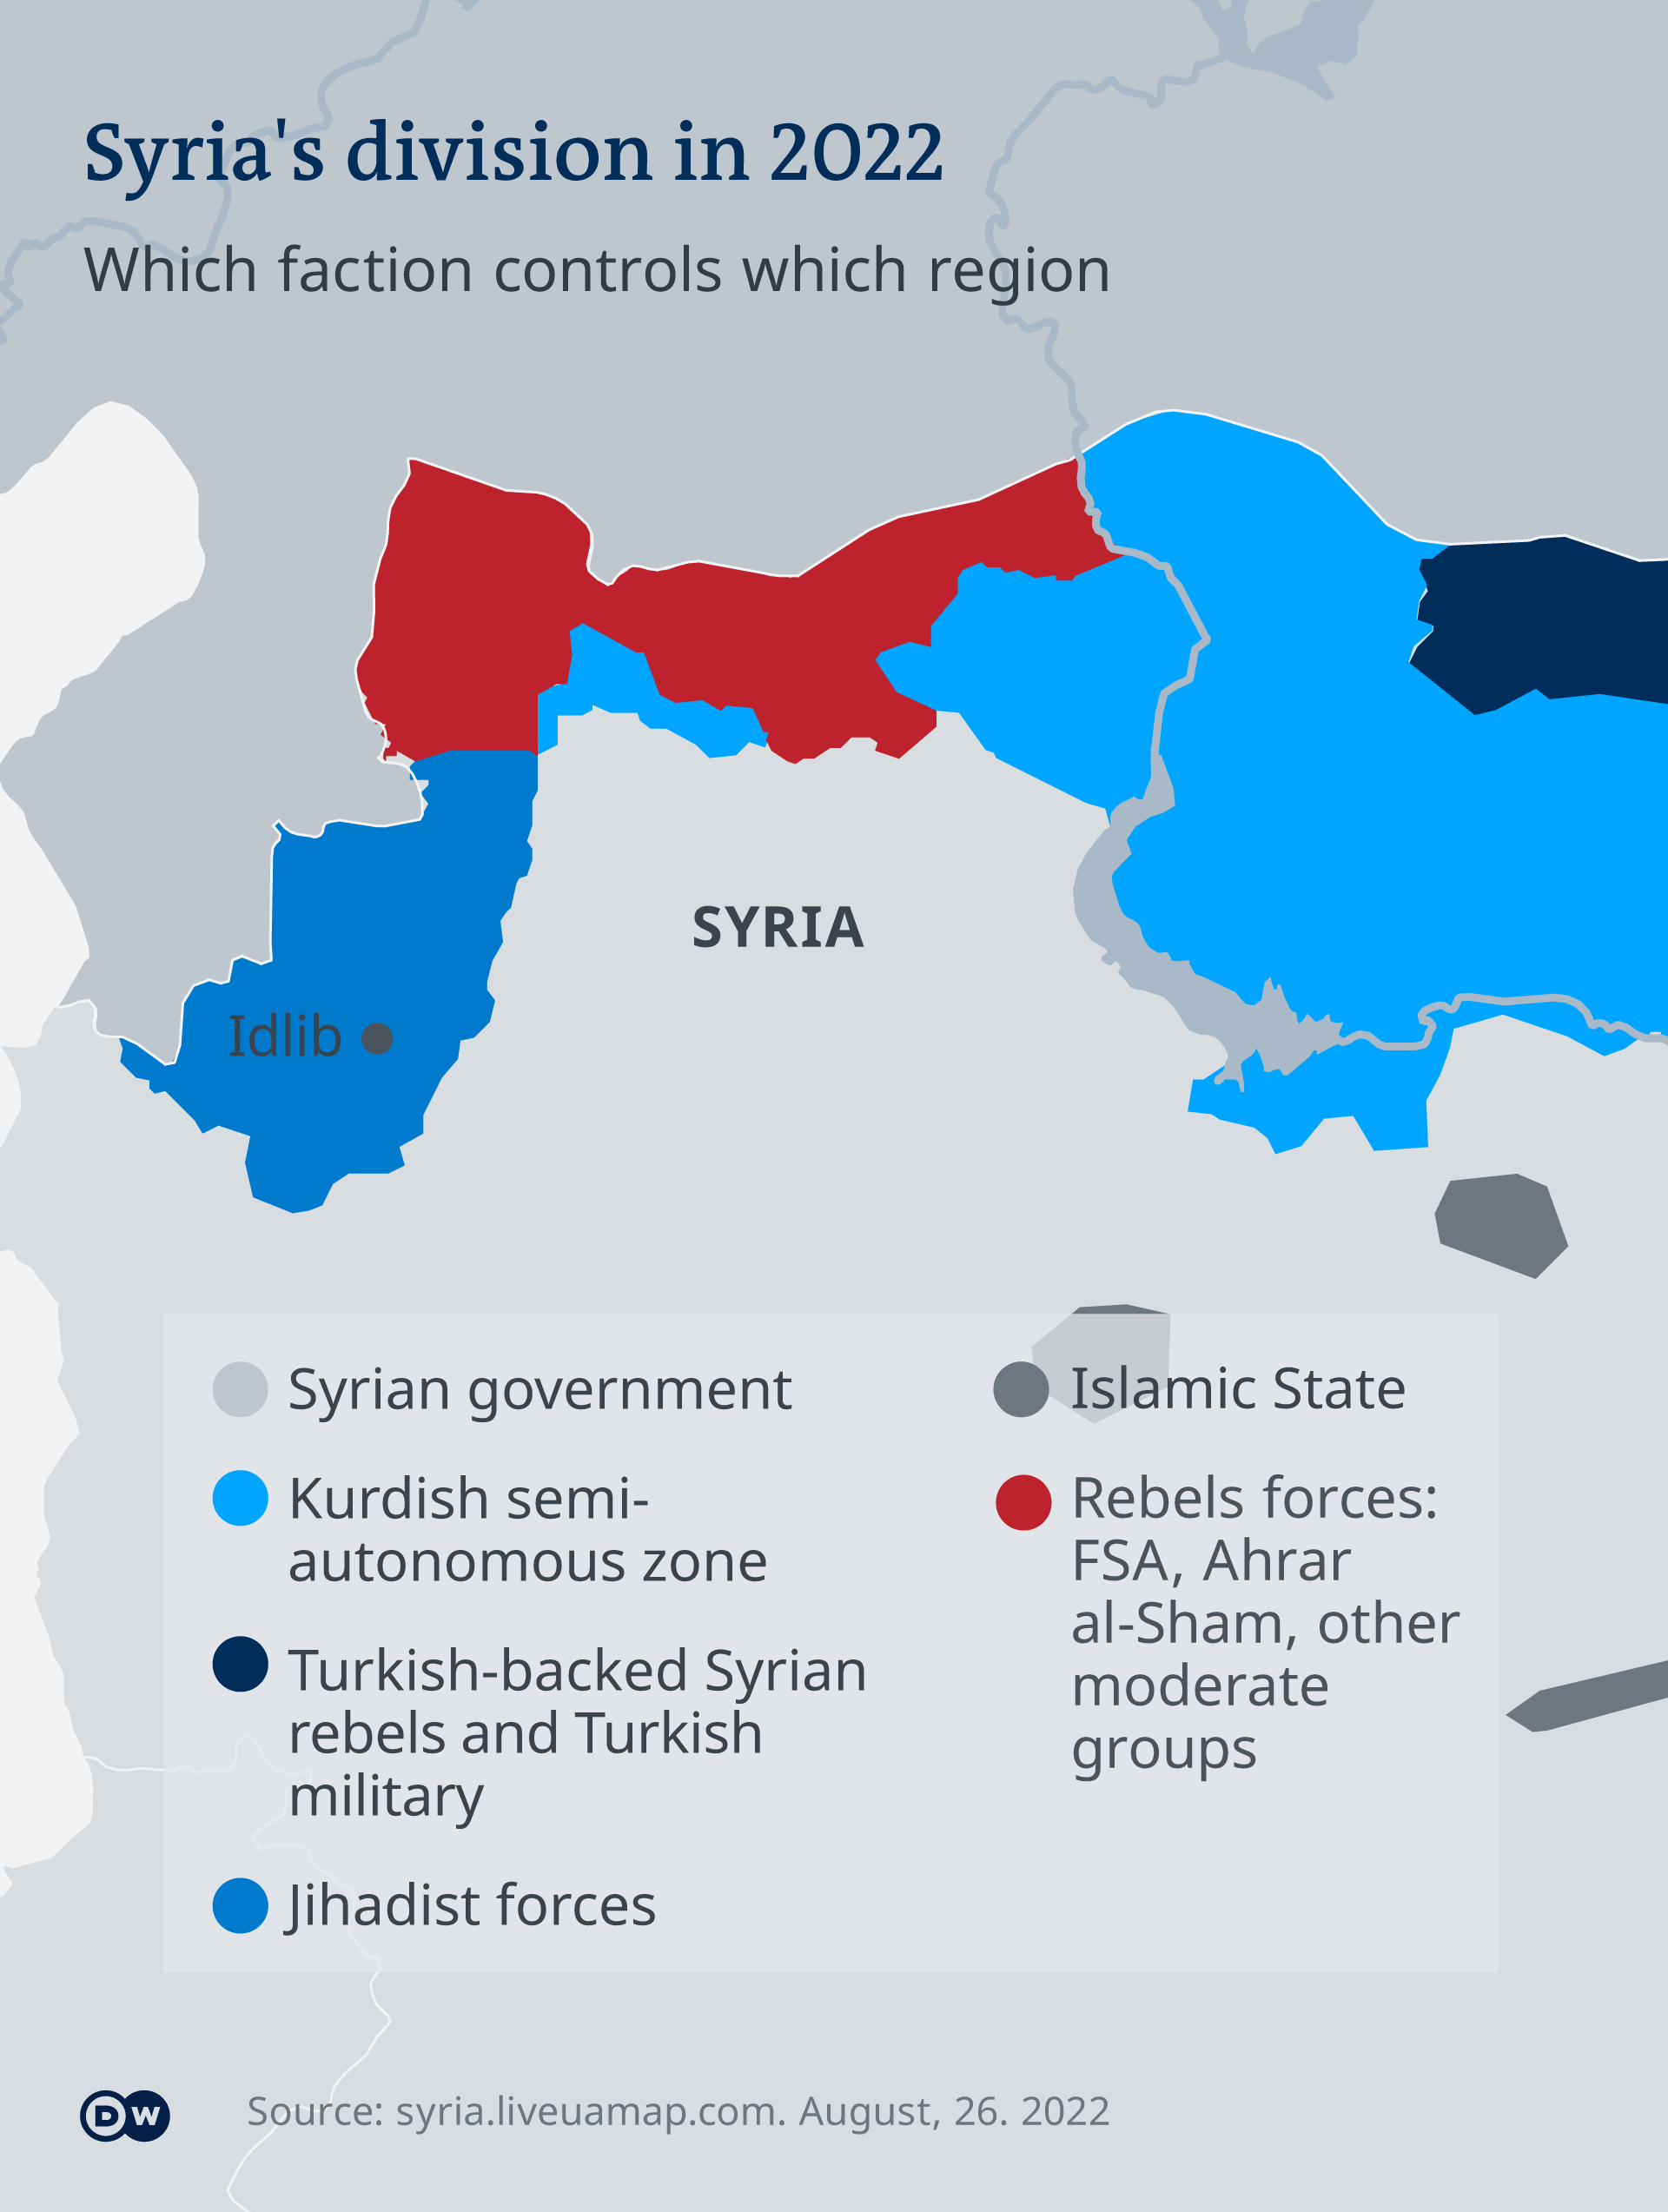 Map: Syrian territory according to controlling group, from semiautonomous Kurdish regions to regime-dominated